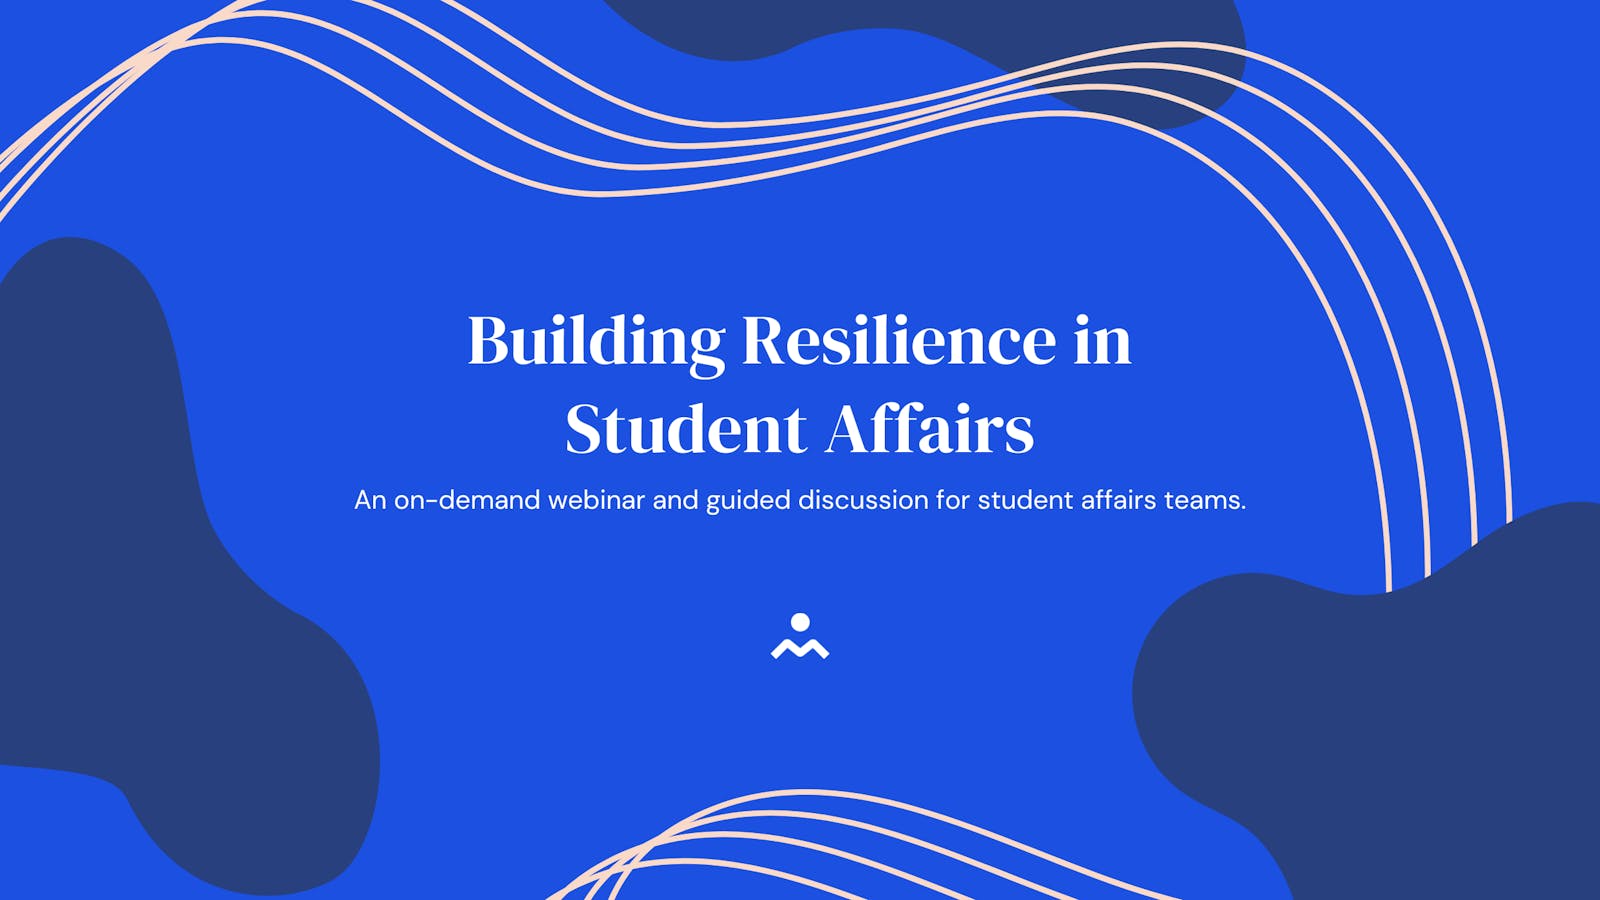 Building Resilience in Student Affairs